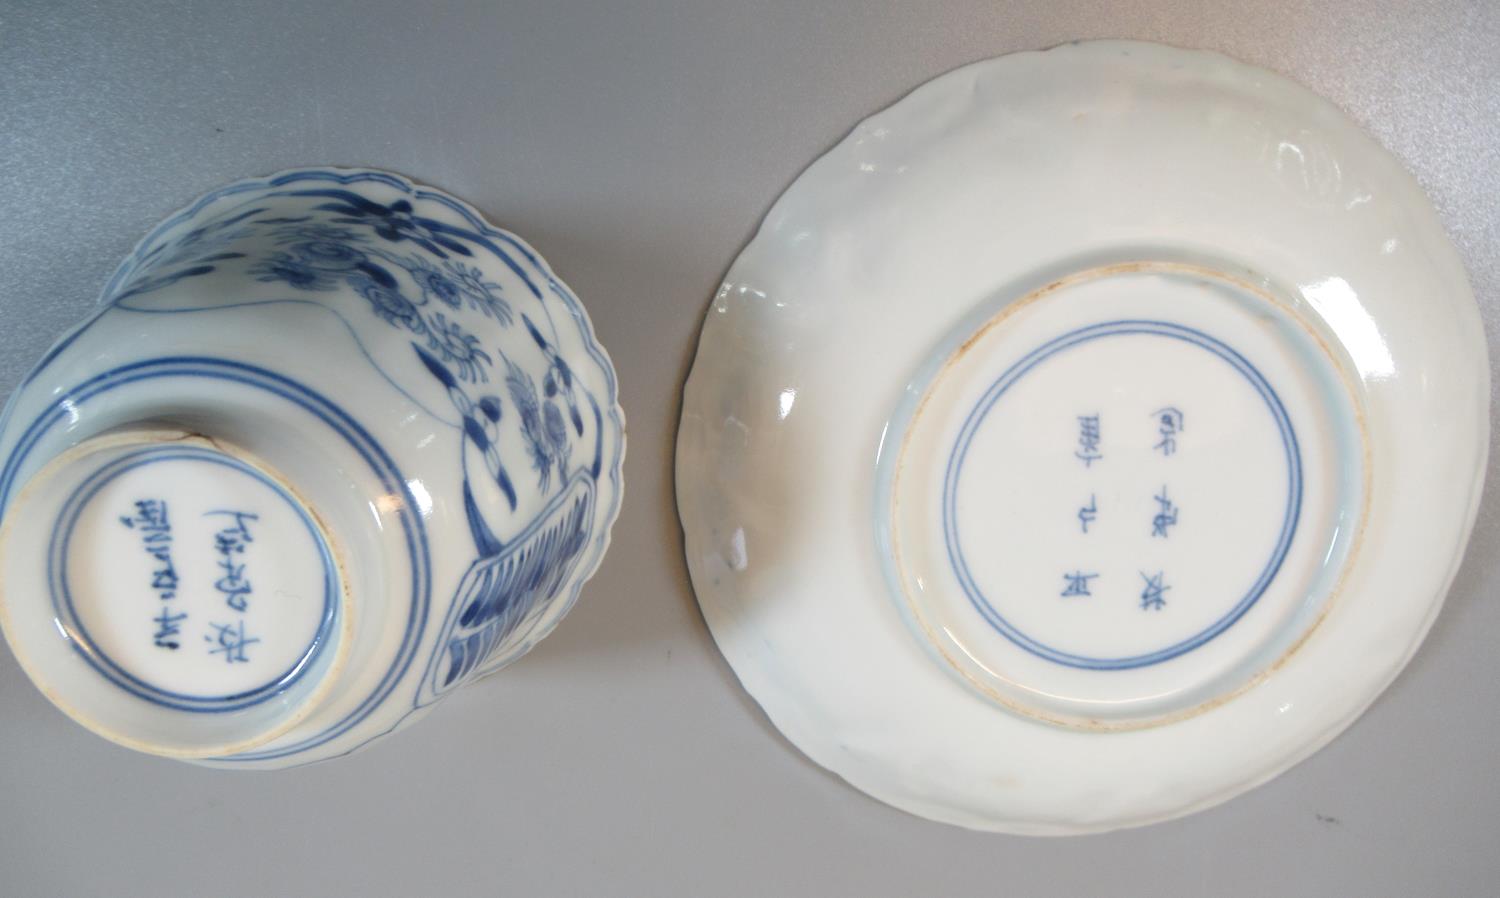 Set of four blue and white porcelain tea bowls and saucers moulded and painted with landscapes and - Image 2 of 2